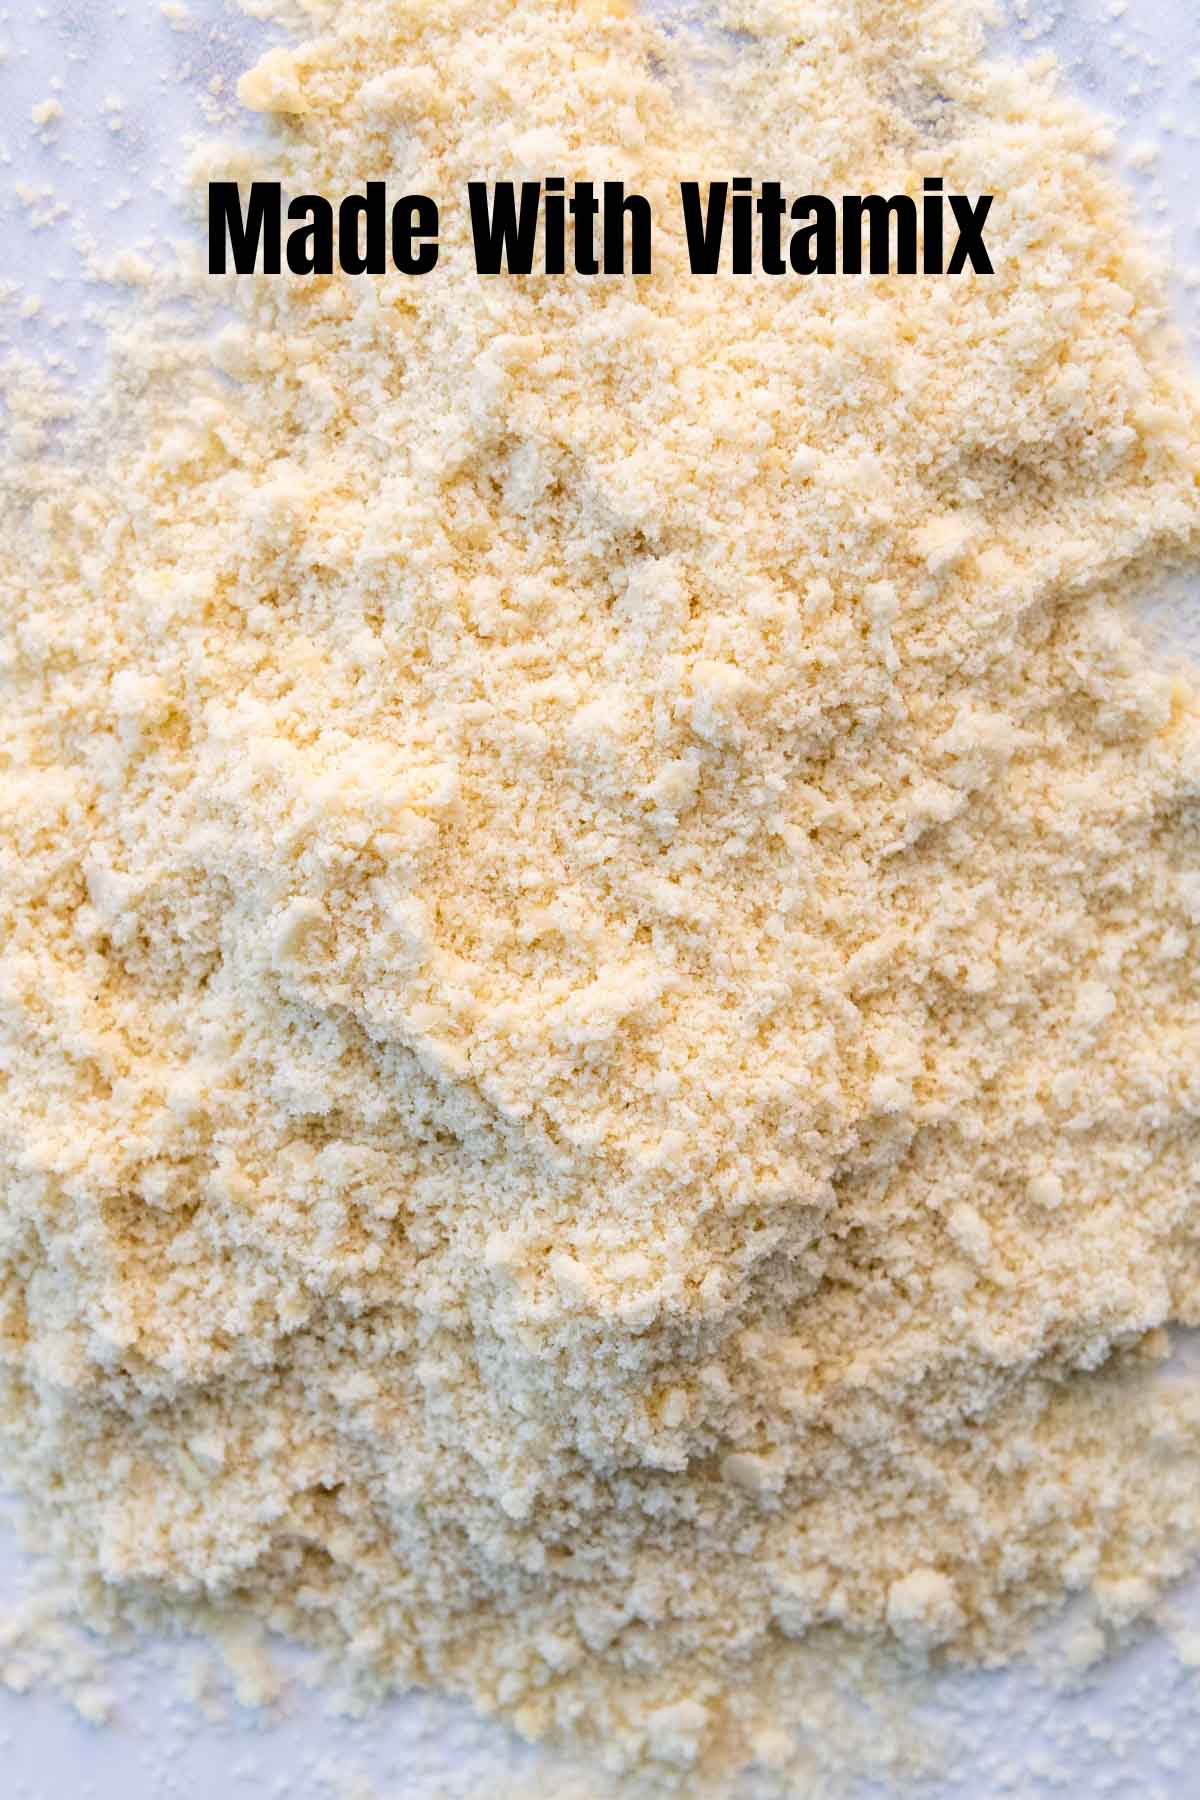 image showing flour made in a blender.